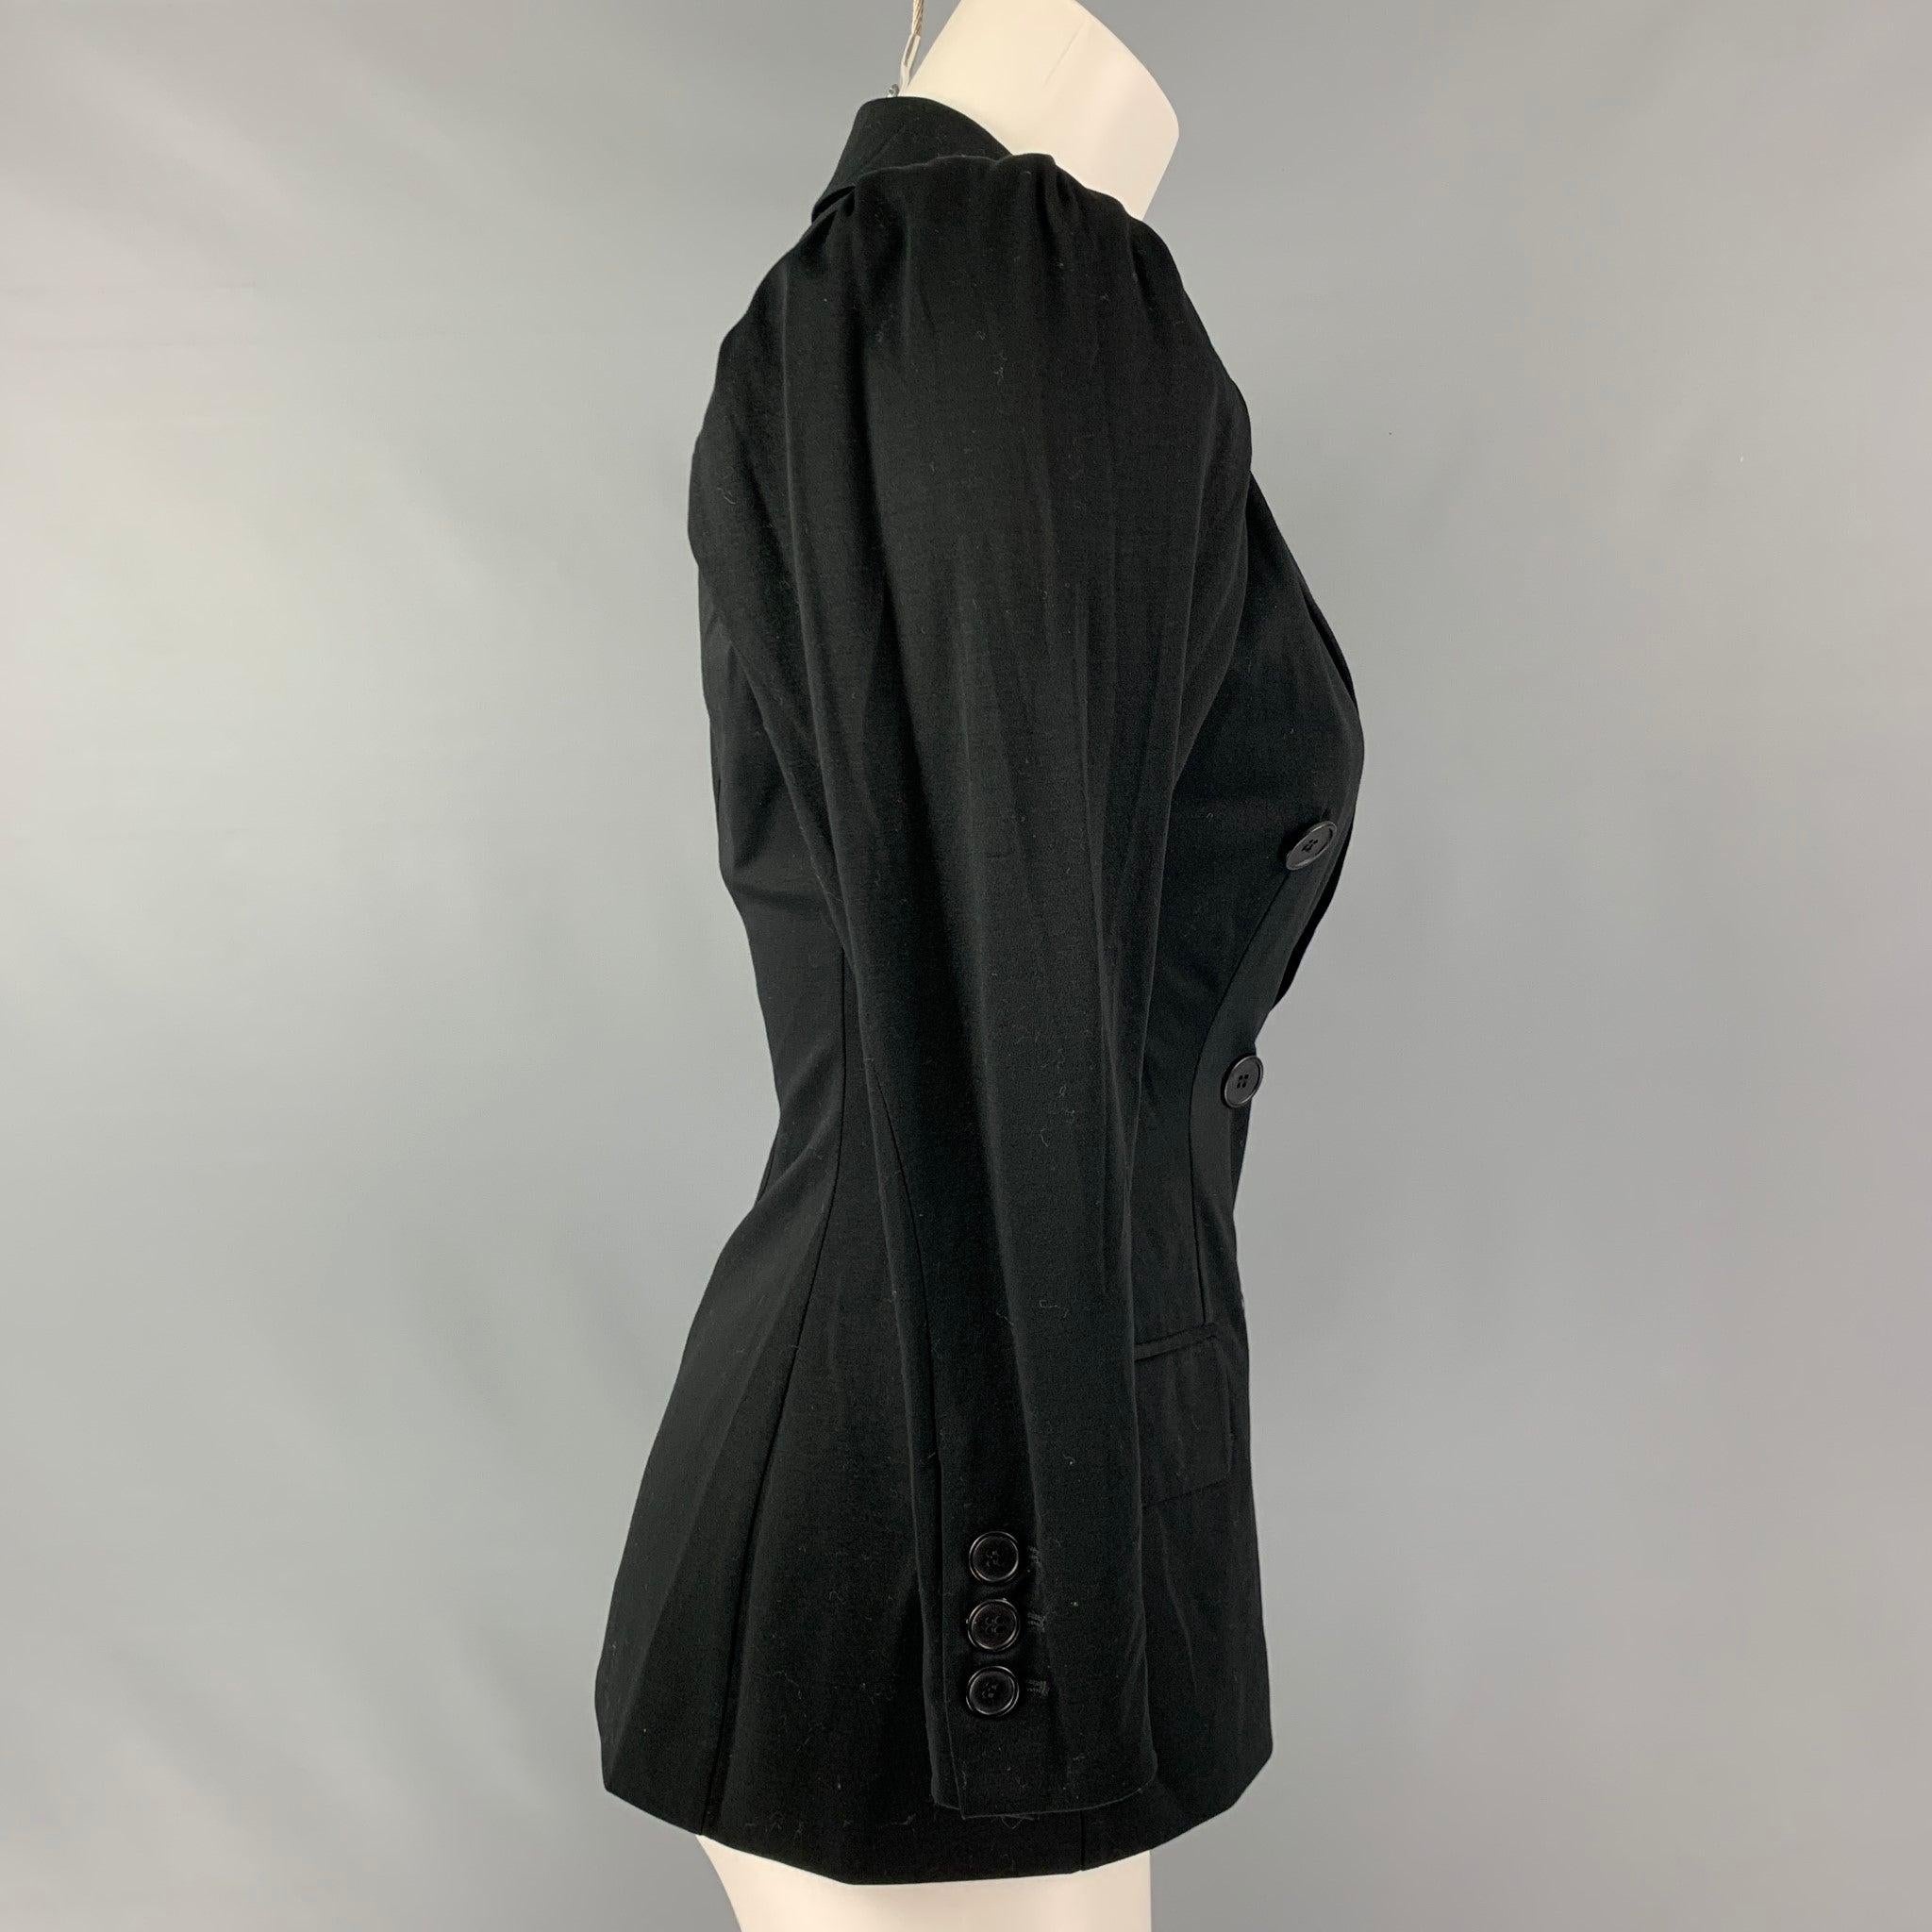 MOSCHINO double breasted jacket comes in a black cotton and polyester knit jersey featuring a notch lapel, flap pockets, pleated shoulder and button closure.Very Good Pre-Owned Condition. 

Marked:   8 

Measurements: 
 
Shoulder: 17.5 inches Bust: